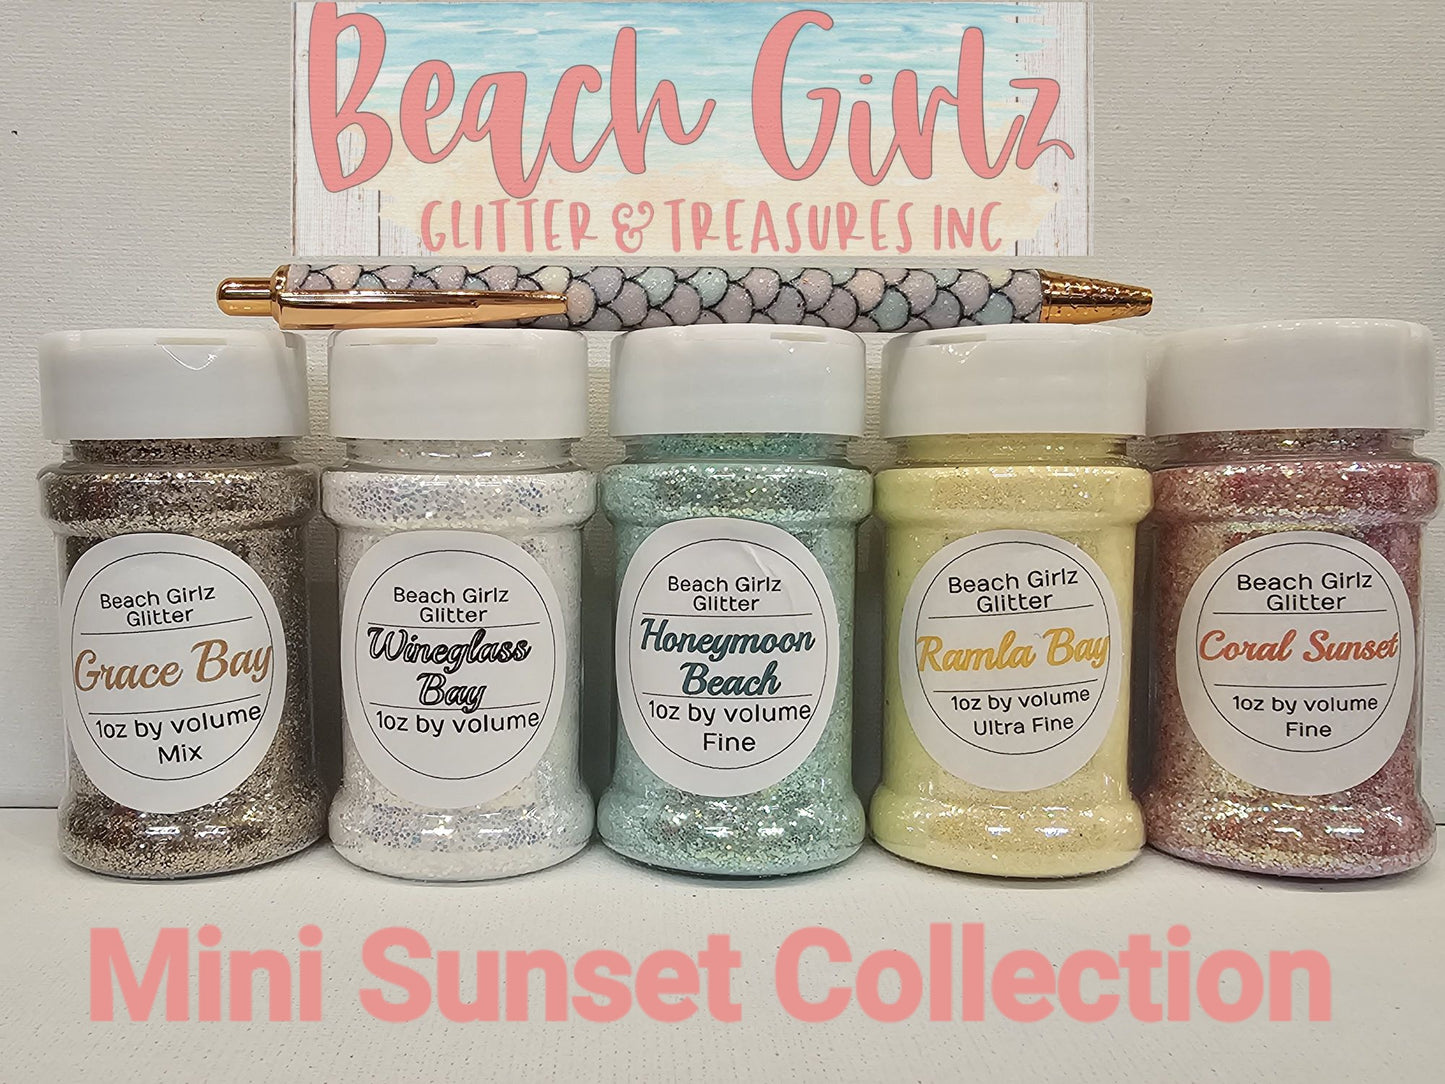 Mini Sunset Collection with pin pen